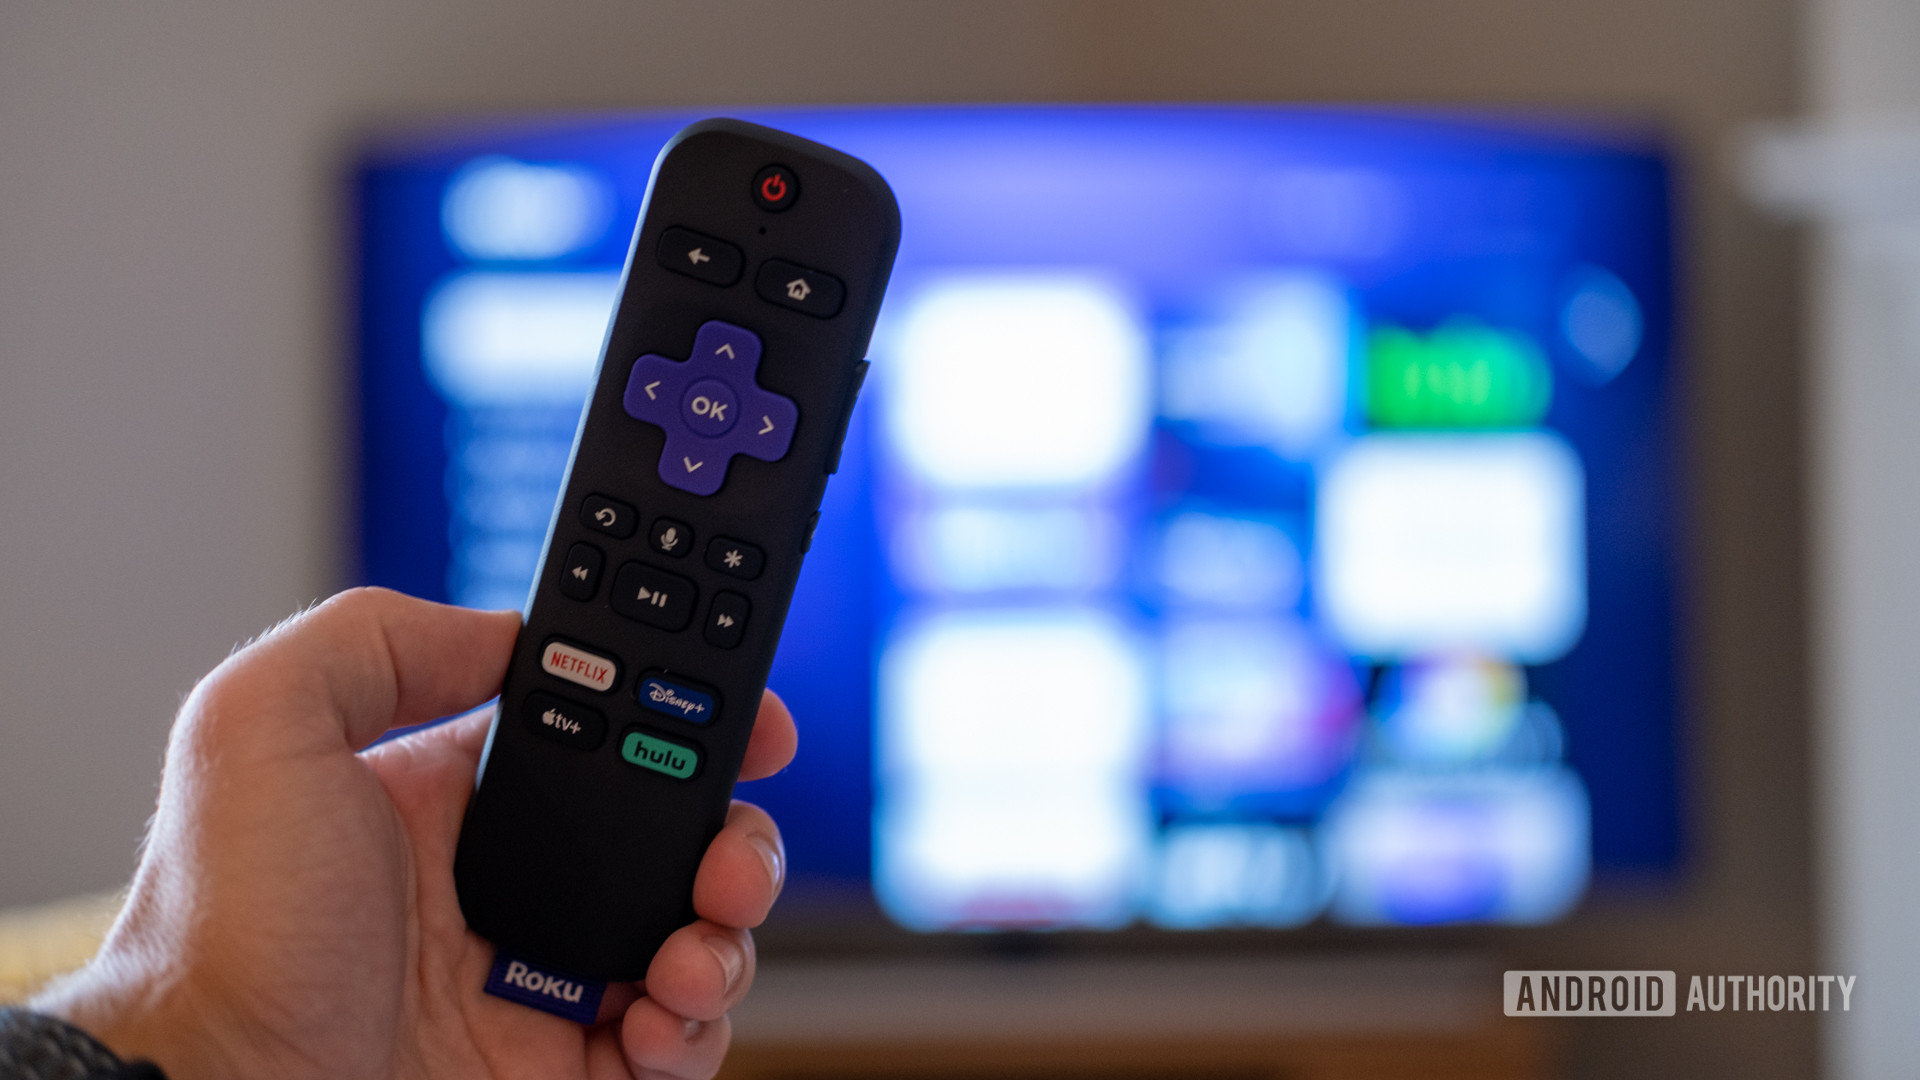 The Roku Streaming Stick 4K remote in front of a TV